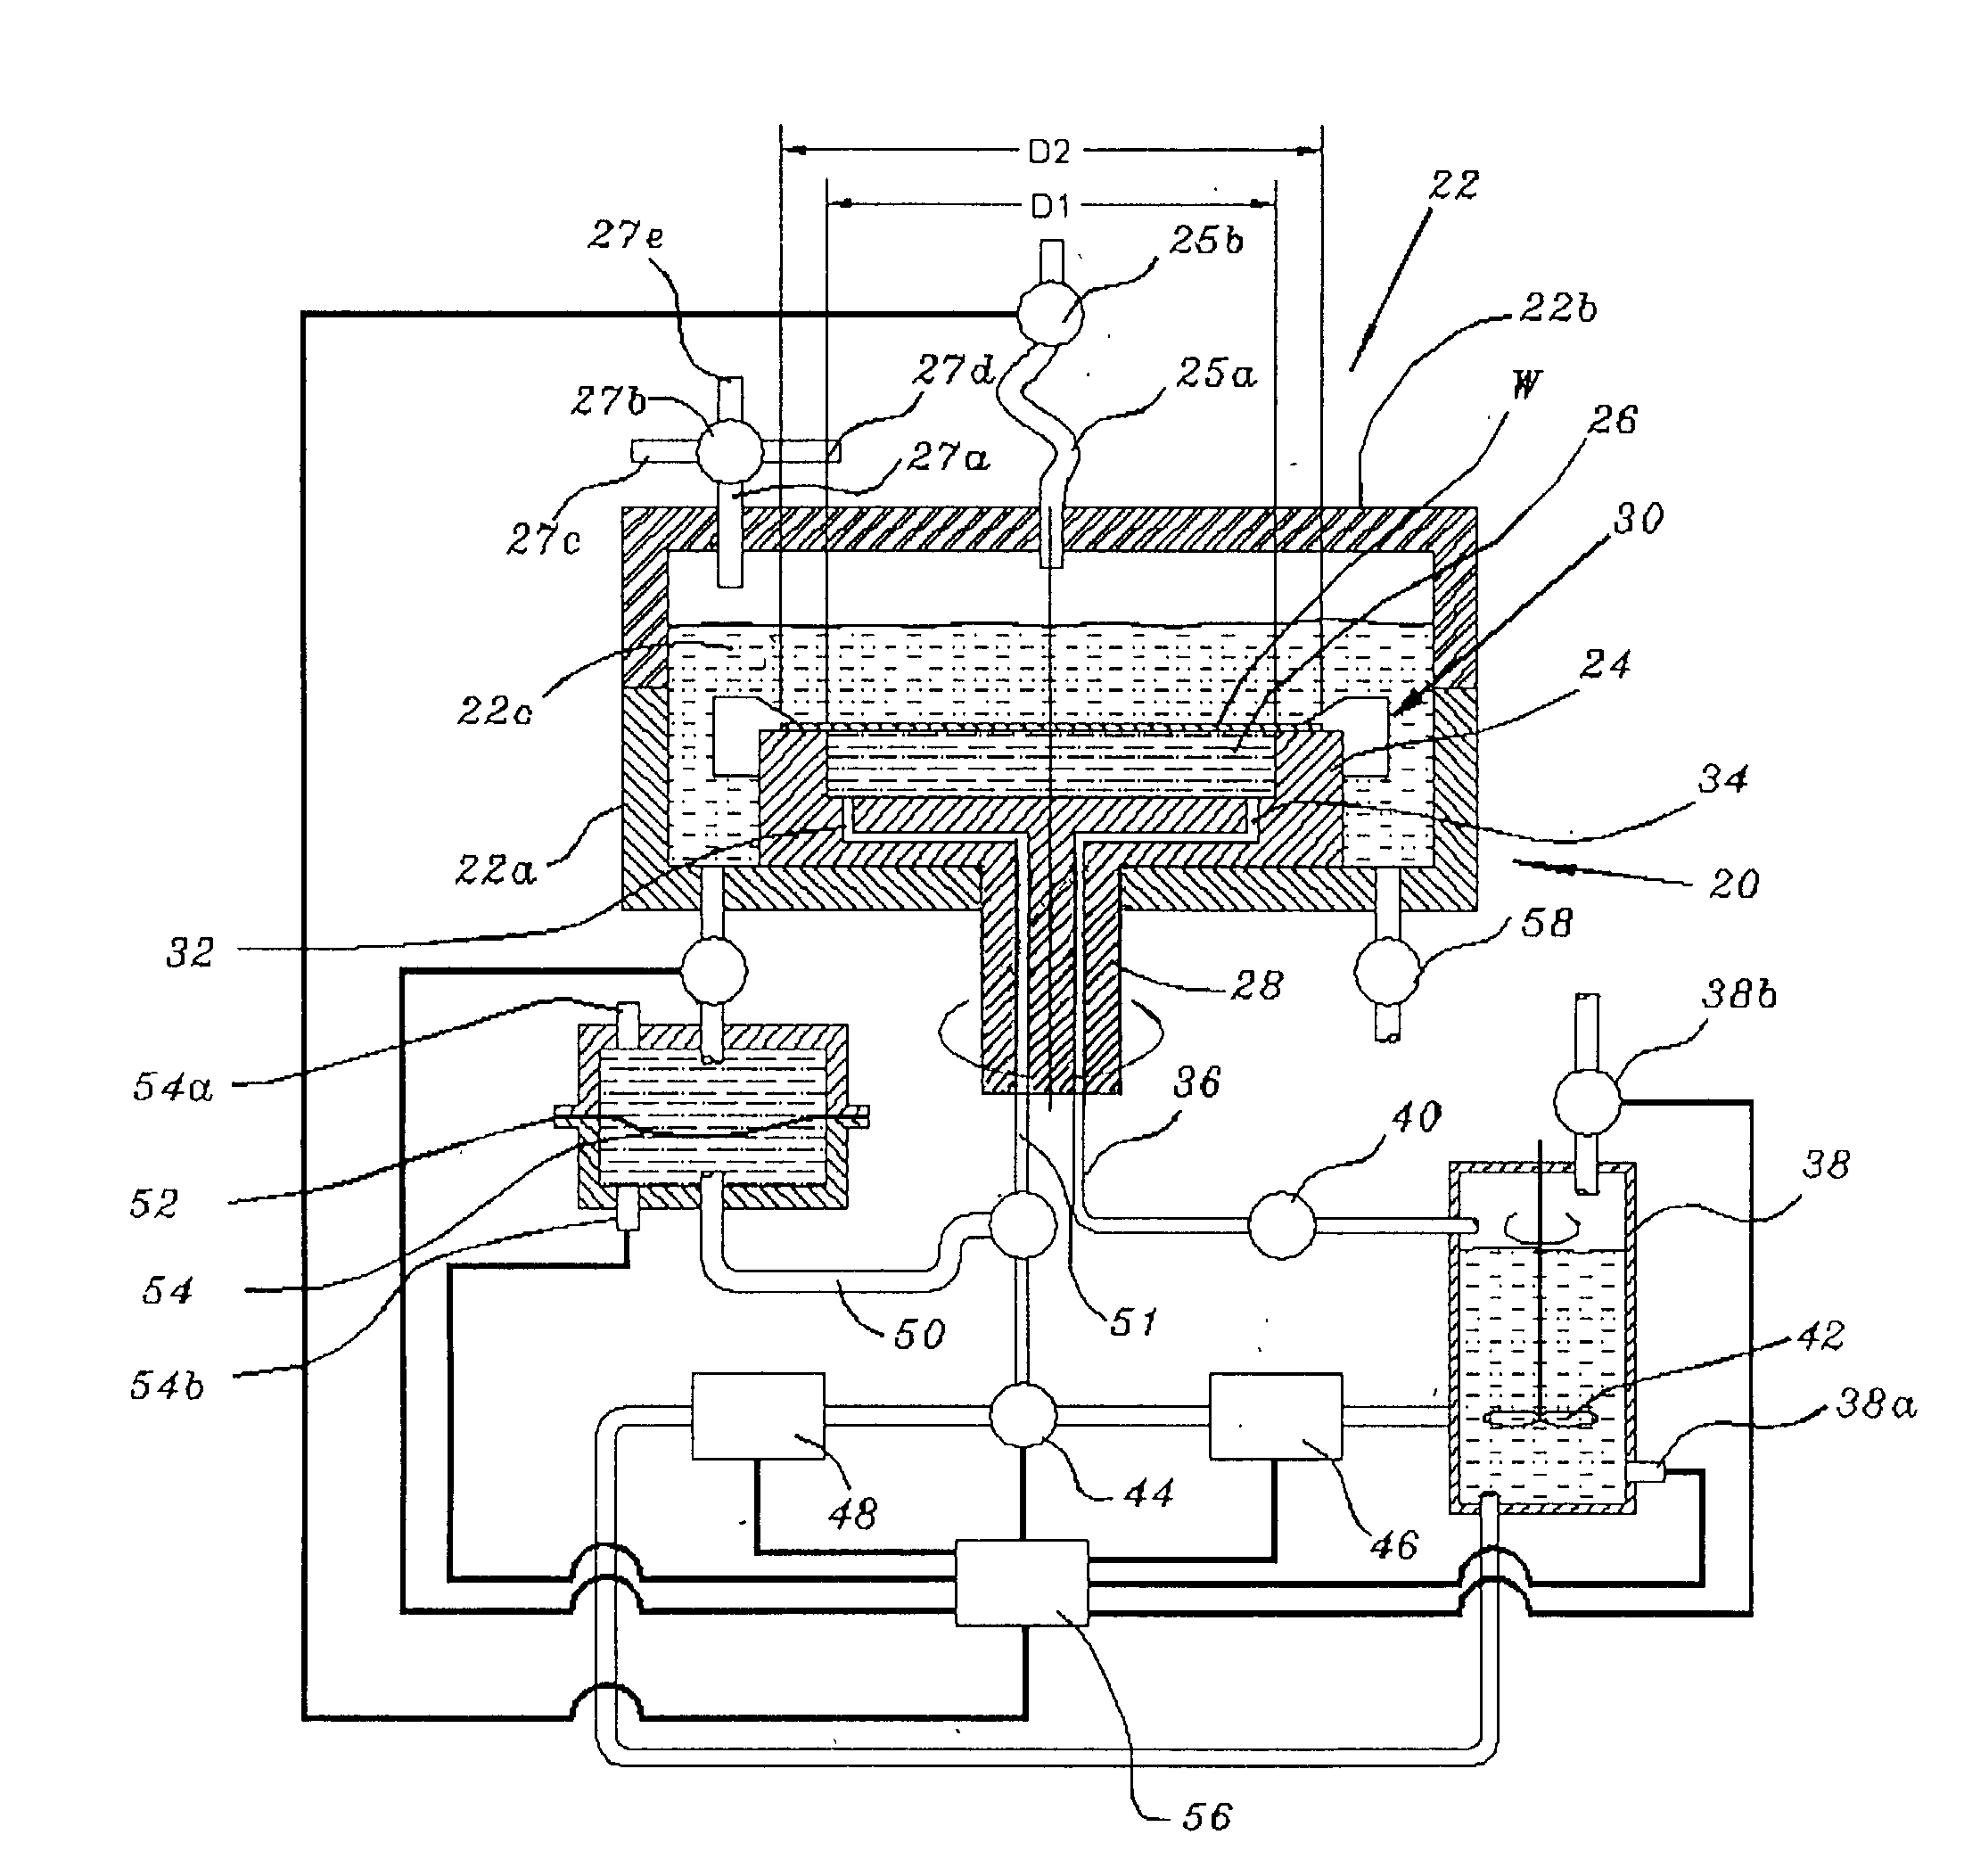 Temperature-controlled substrate holder for processing in fluids